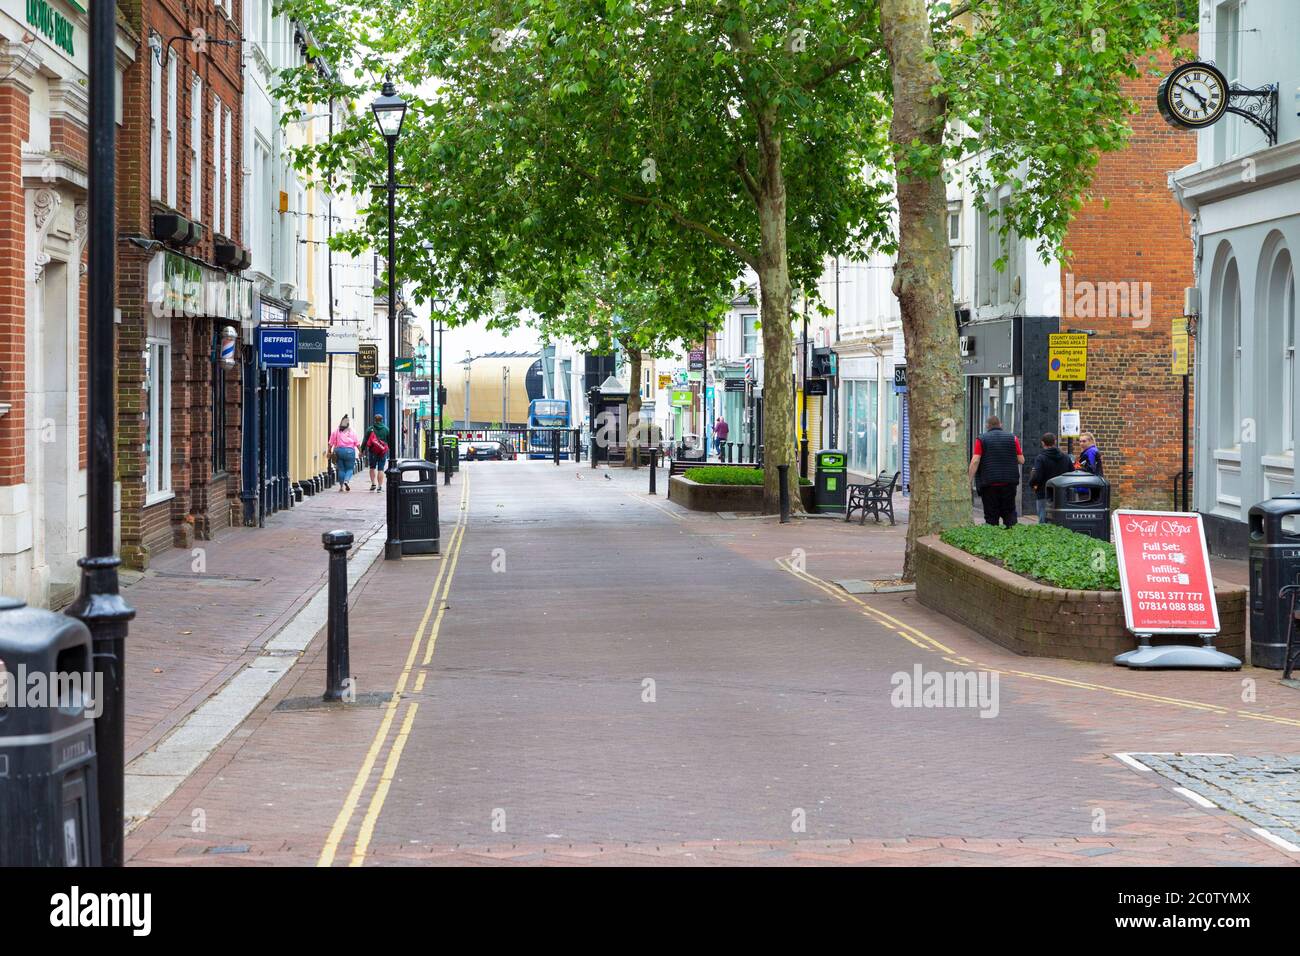 Ashford, Kent, UK. 12th Jun, 2020. With the impending opening of shops announced by the government from Monday, Ashford city centre appears to be deserted with very few signs of businesses about to reopen. Photo Credit: Paul Lawrenson/Alamy Live News Stock Photo